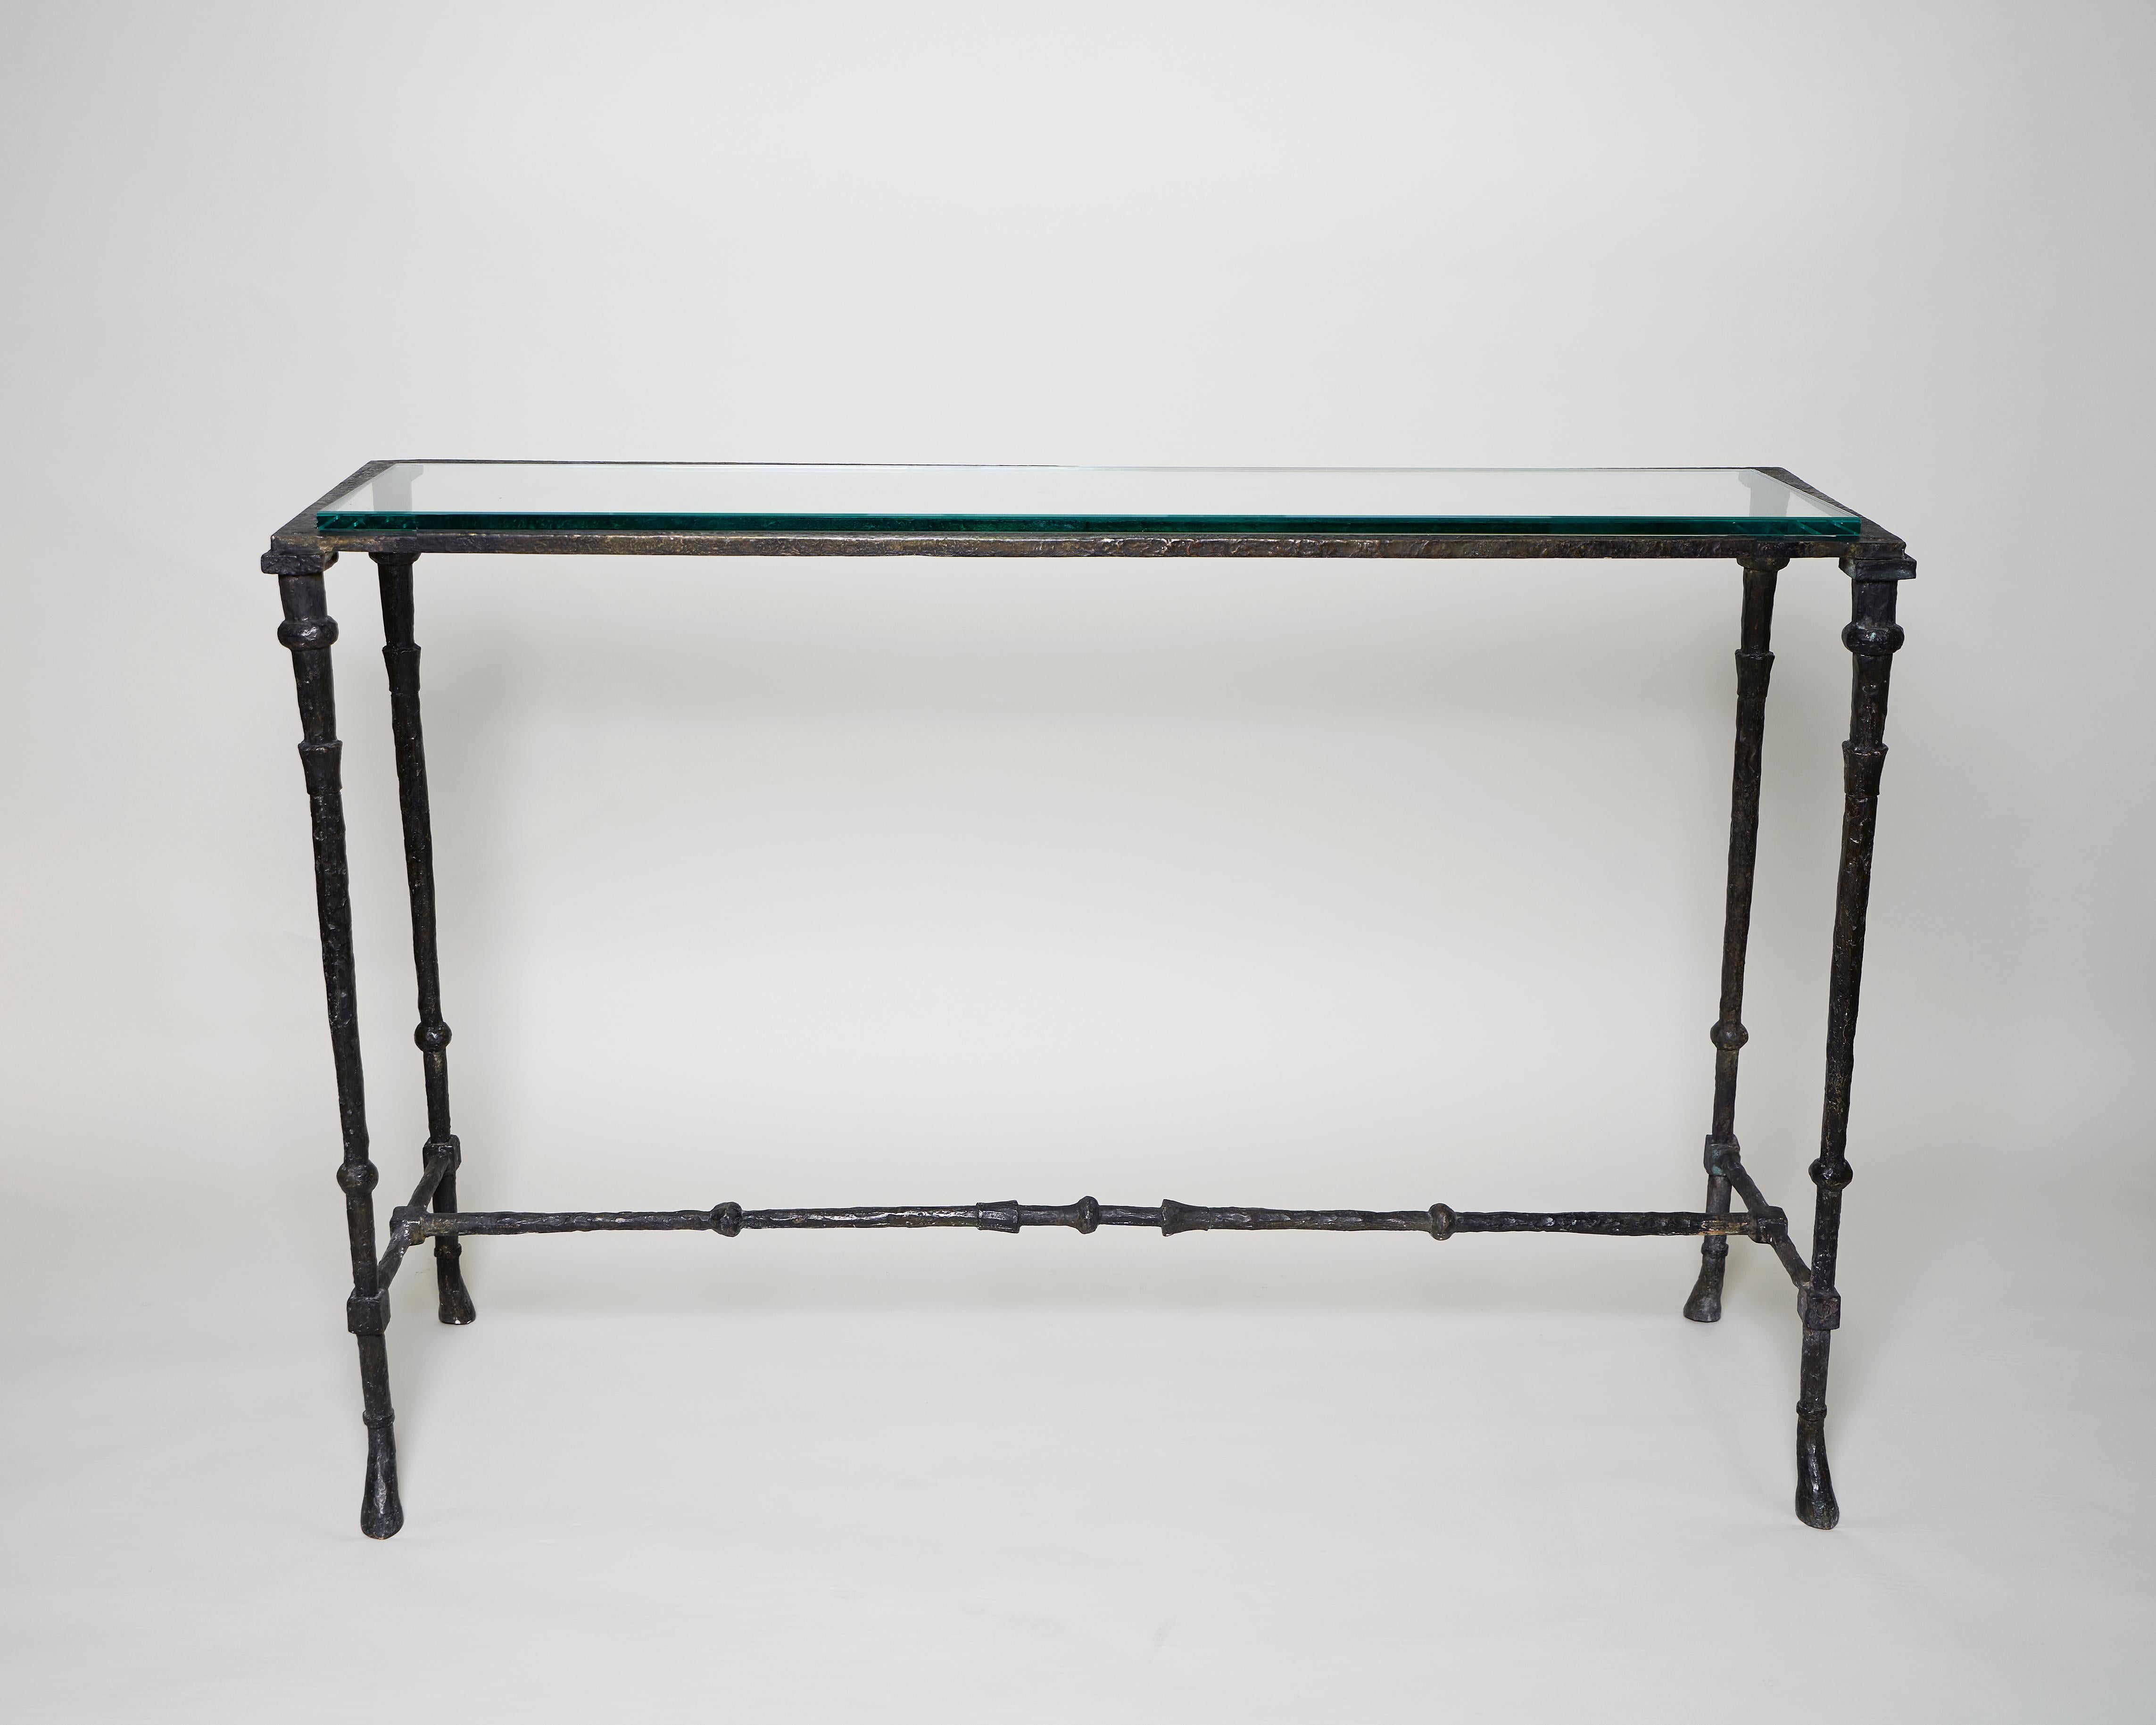 JML Limited Edition - Designed by Jacques Andrieux 
Patinated Bronze structure, glass top.
